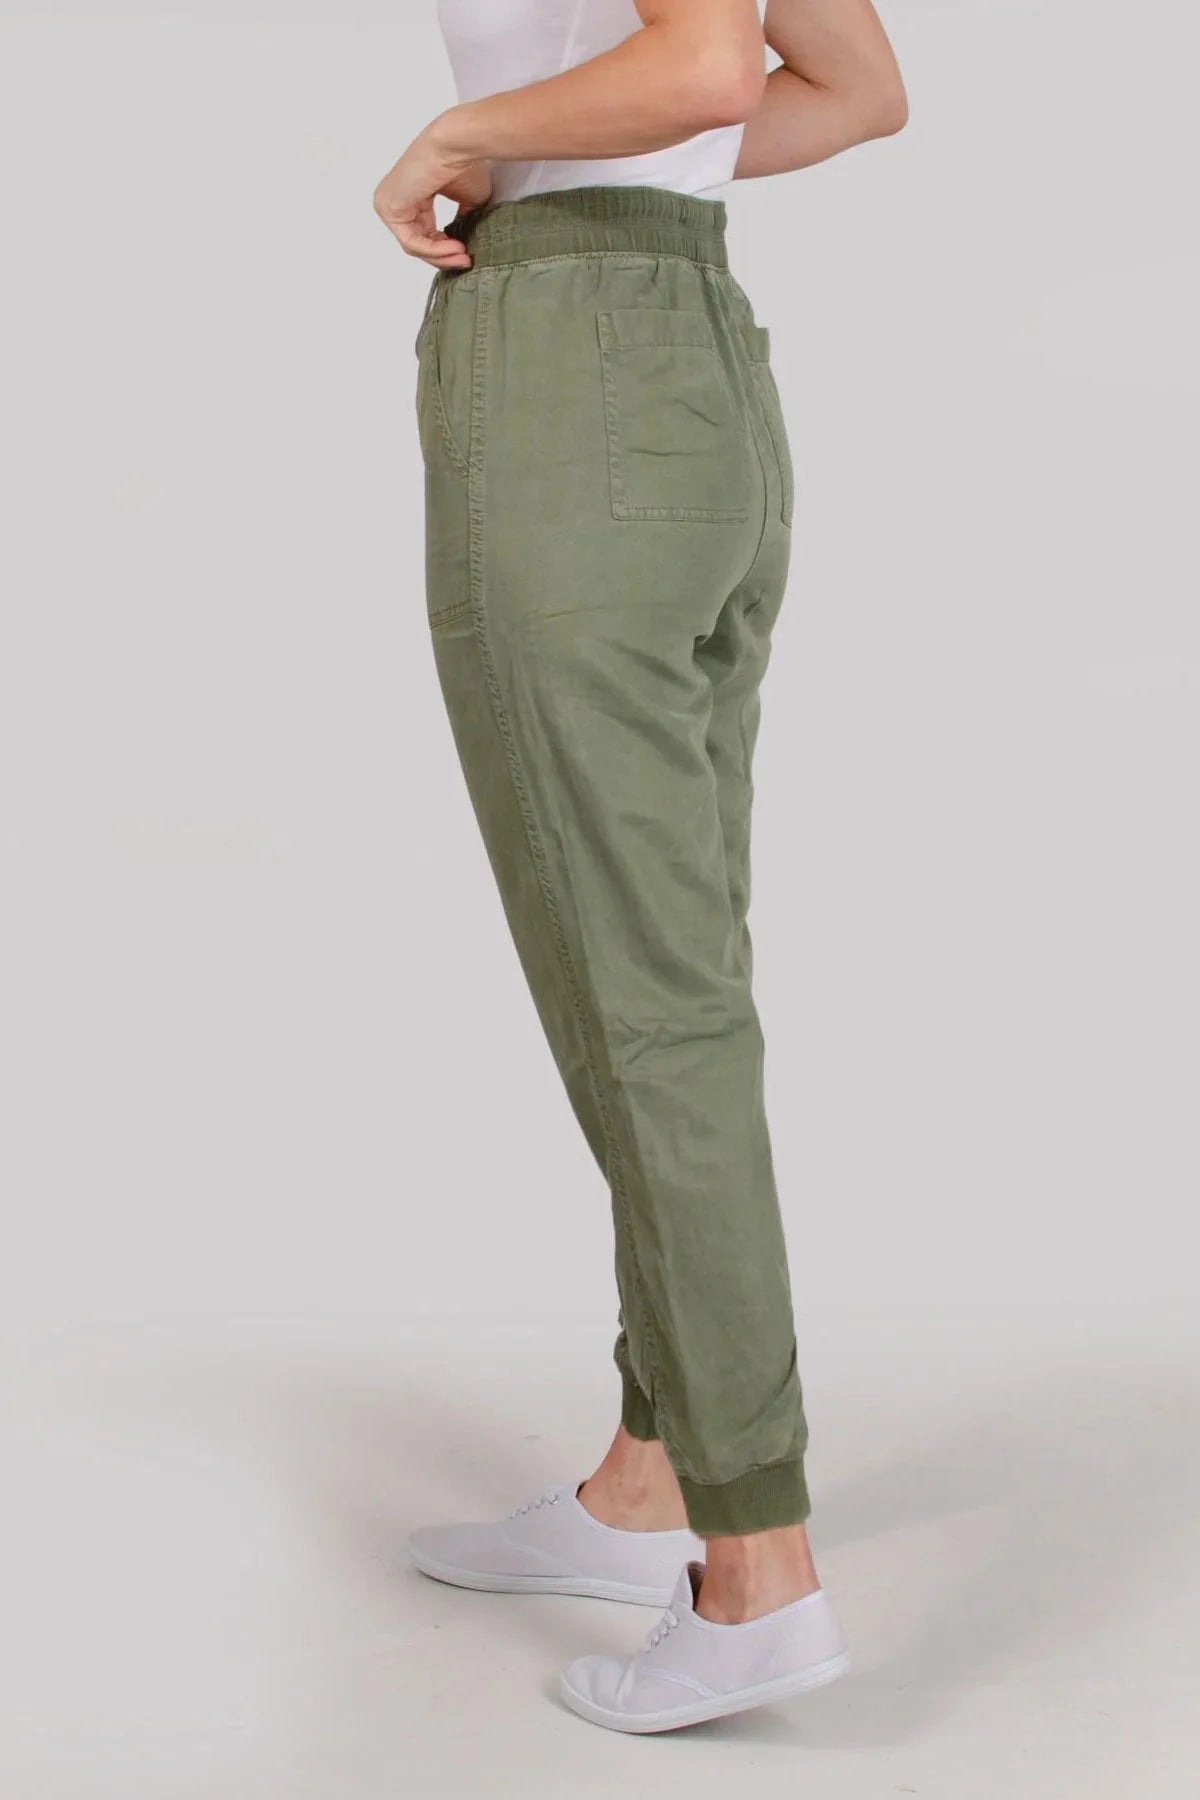 M&S Ankle Cuff Jogger Pants